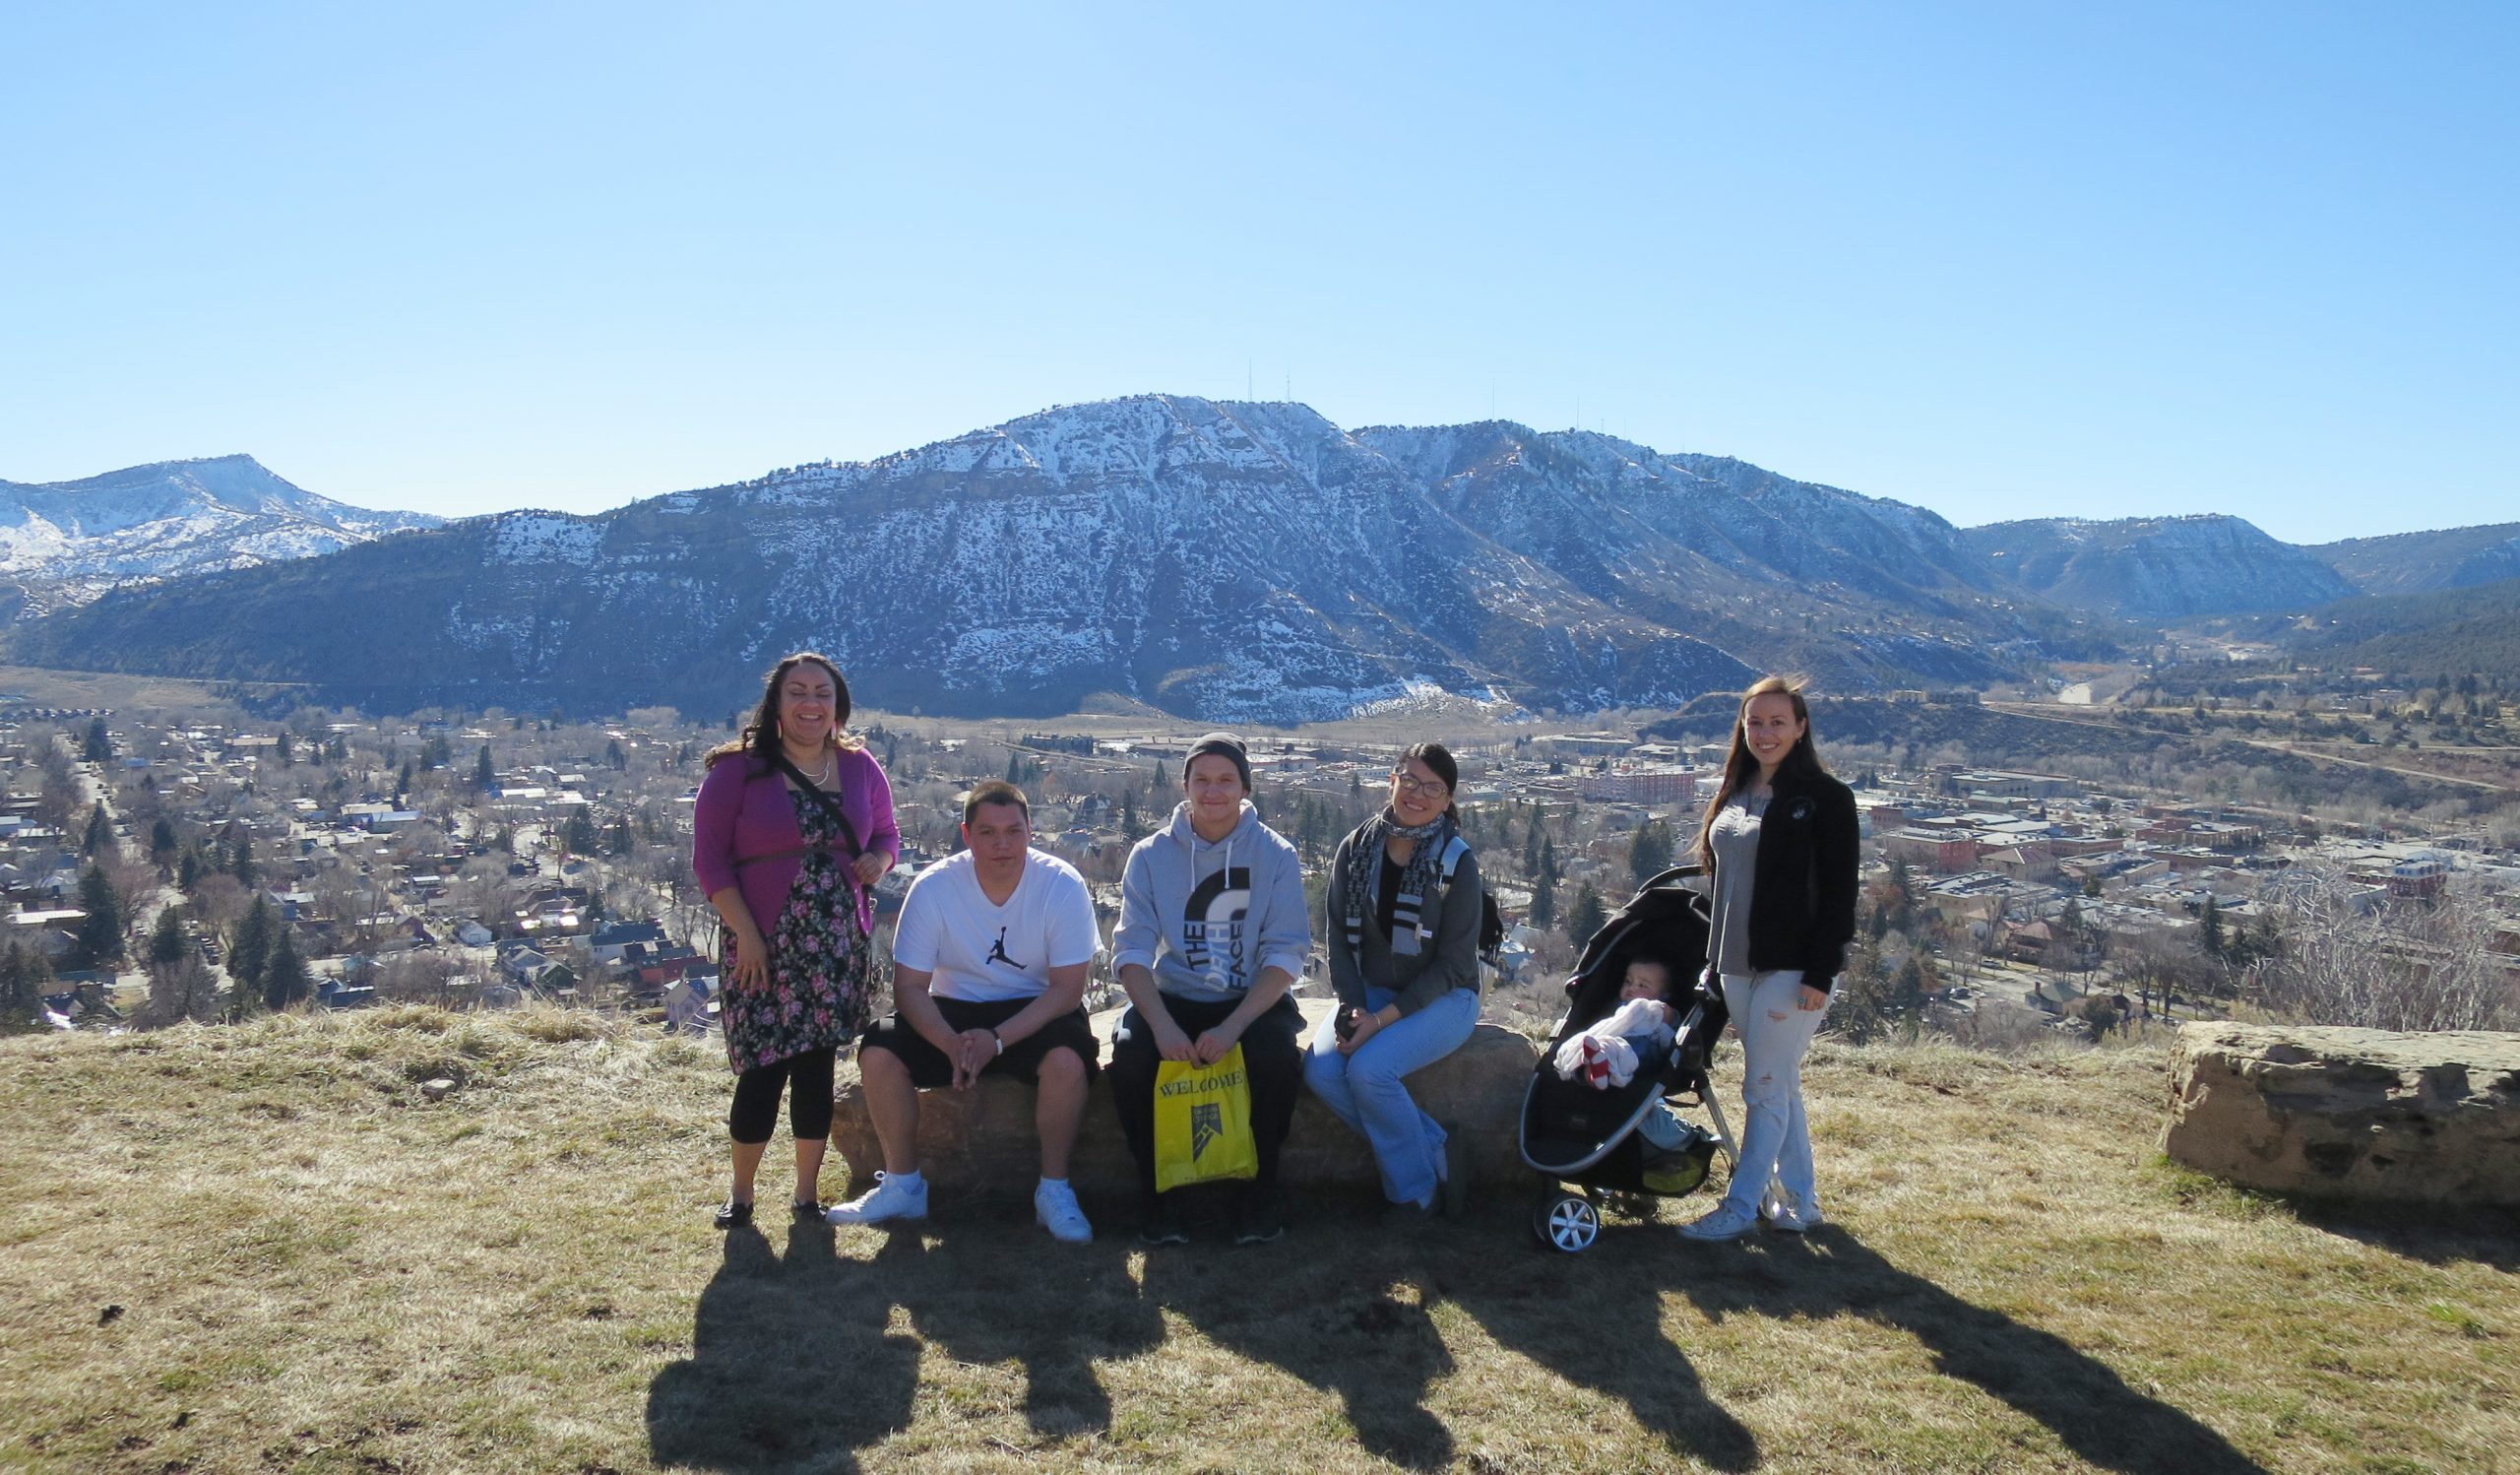 three Native college students attending Leech Lake Tribal College (LLTC) in Cass Lake, Minnesota travelled to Durango, Colorado to visit the Fort Lewis College campus, a private four-year college that offers a tuition-waiver program to American Indian students. 